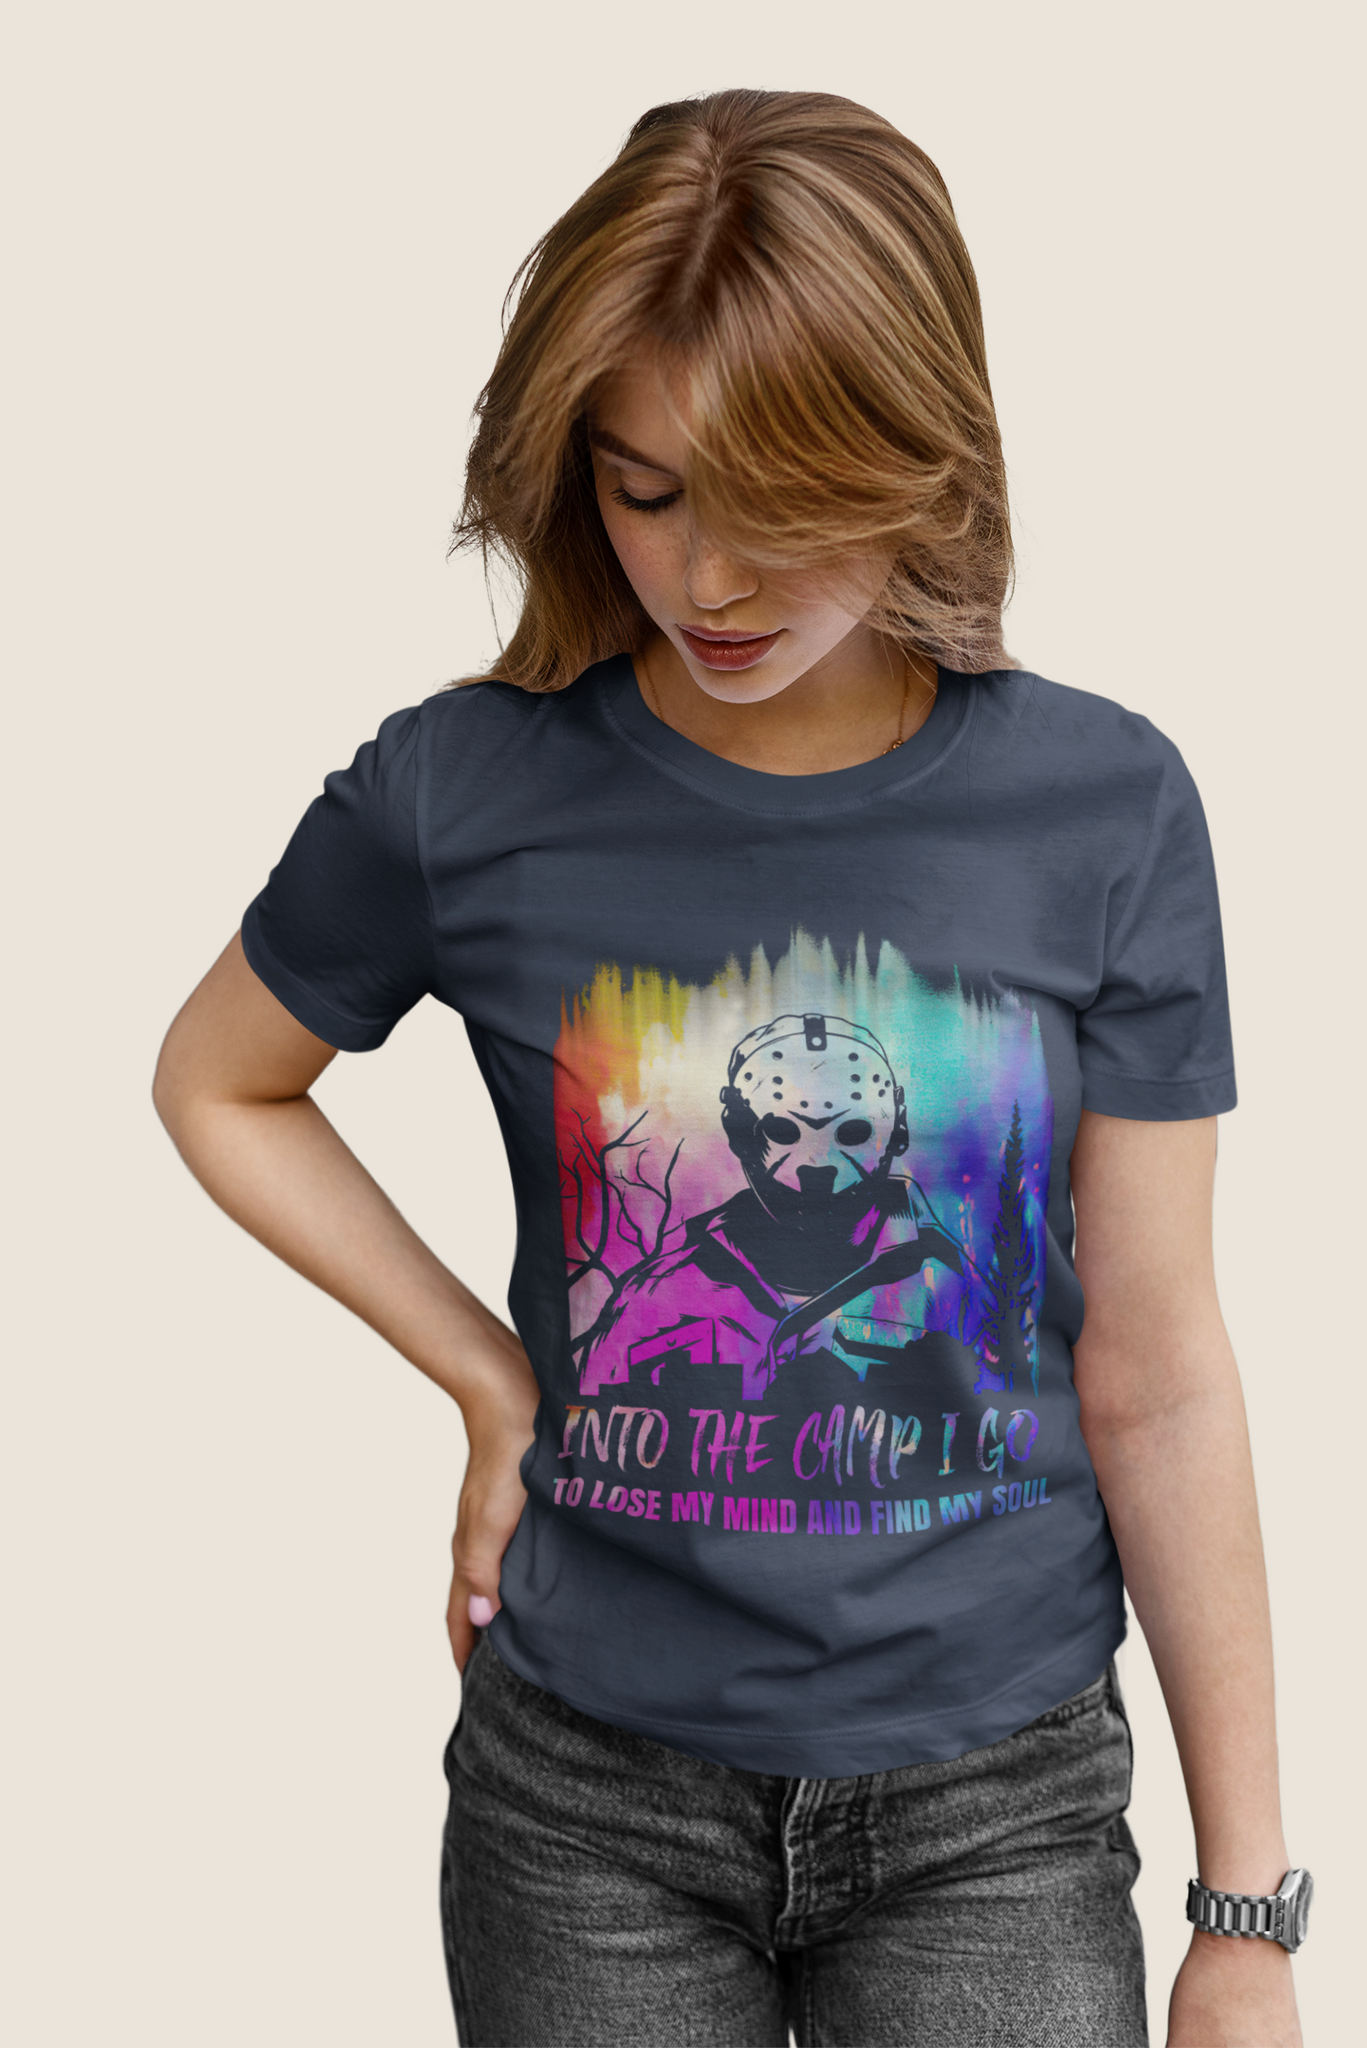 Friday 13th T Shirt, Into The Camp I Go T Shirt, Jason Voorhees T Shirt, Halloween Gifts